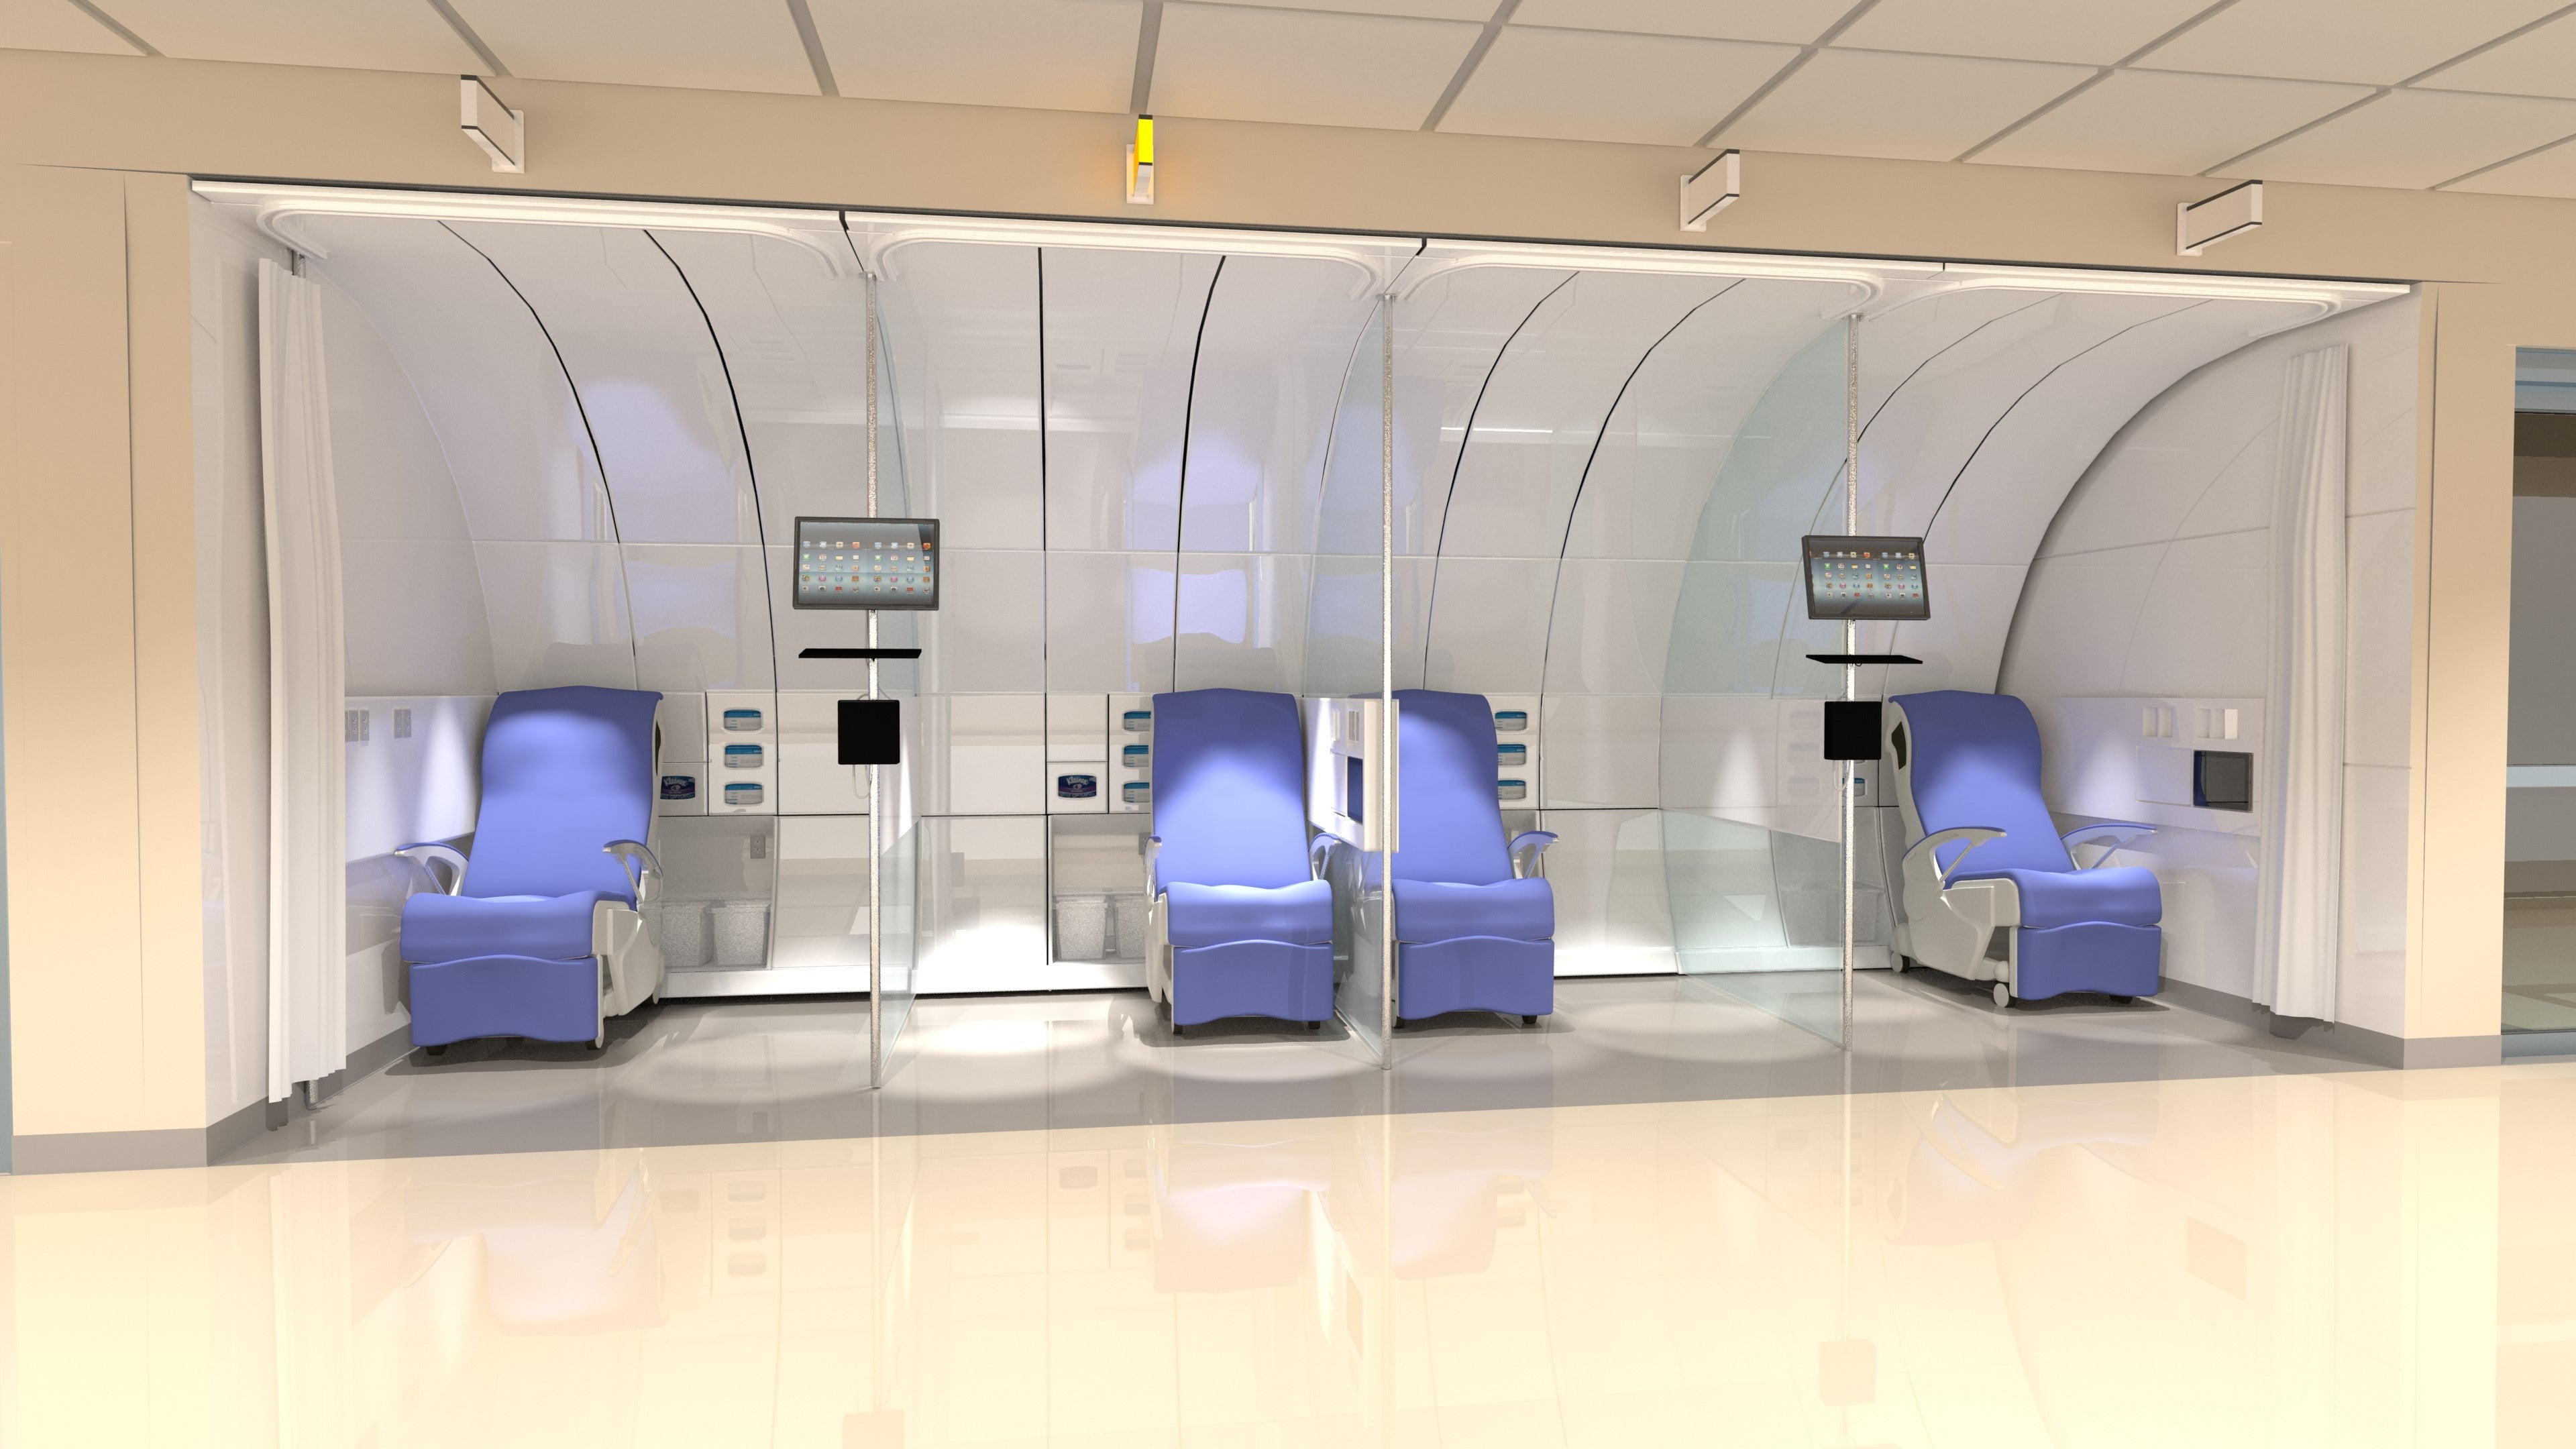 Airline-model pods and gardens among wards among the concepts for hospitals of upcoming